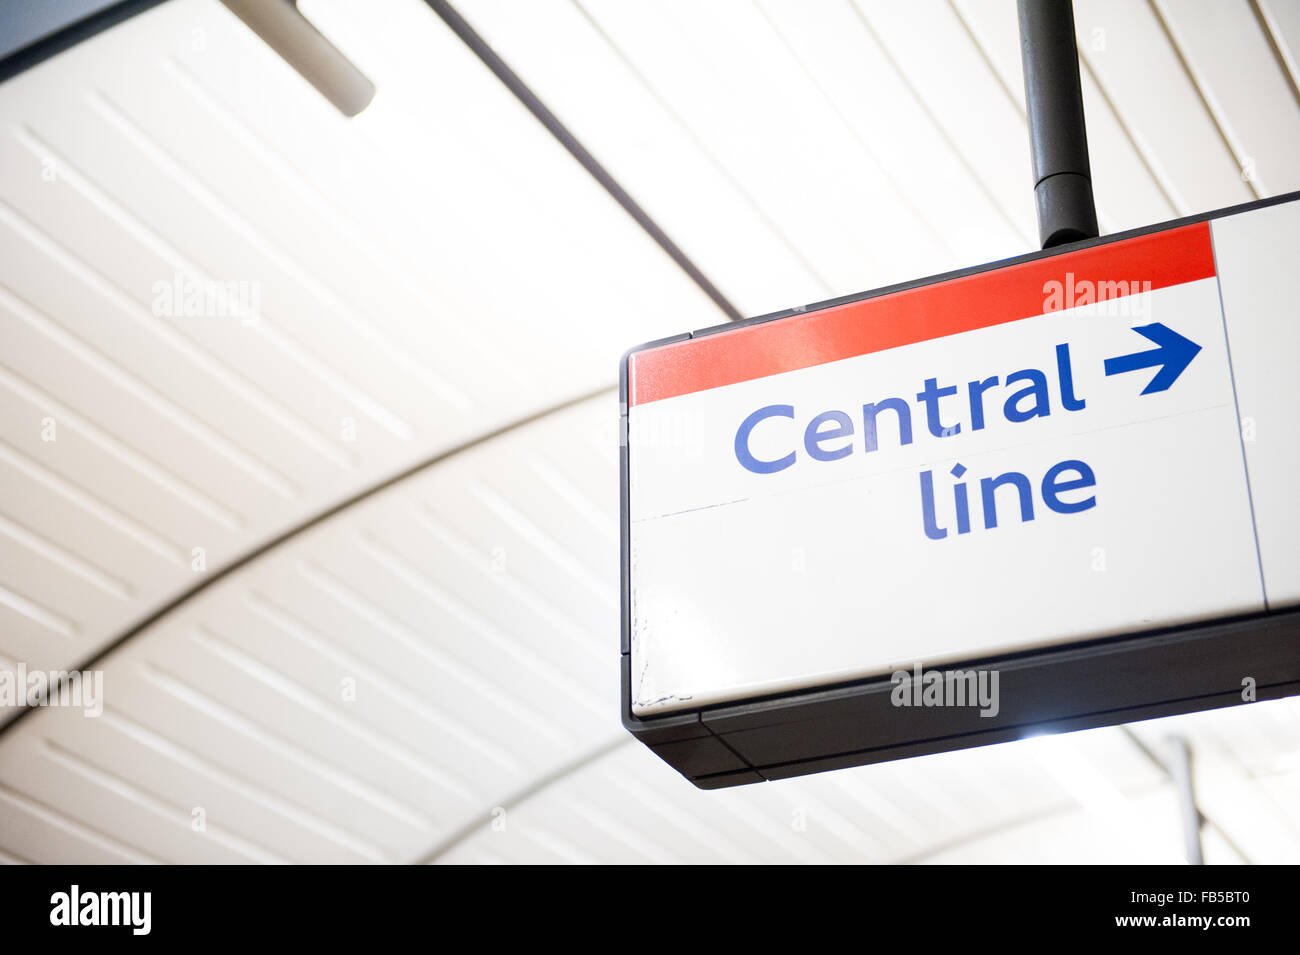 Central Line London Underground tube station in London. Stock Photo